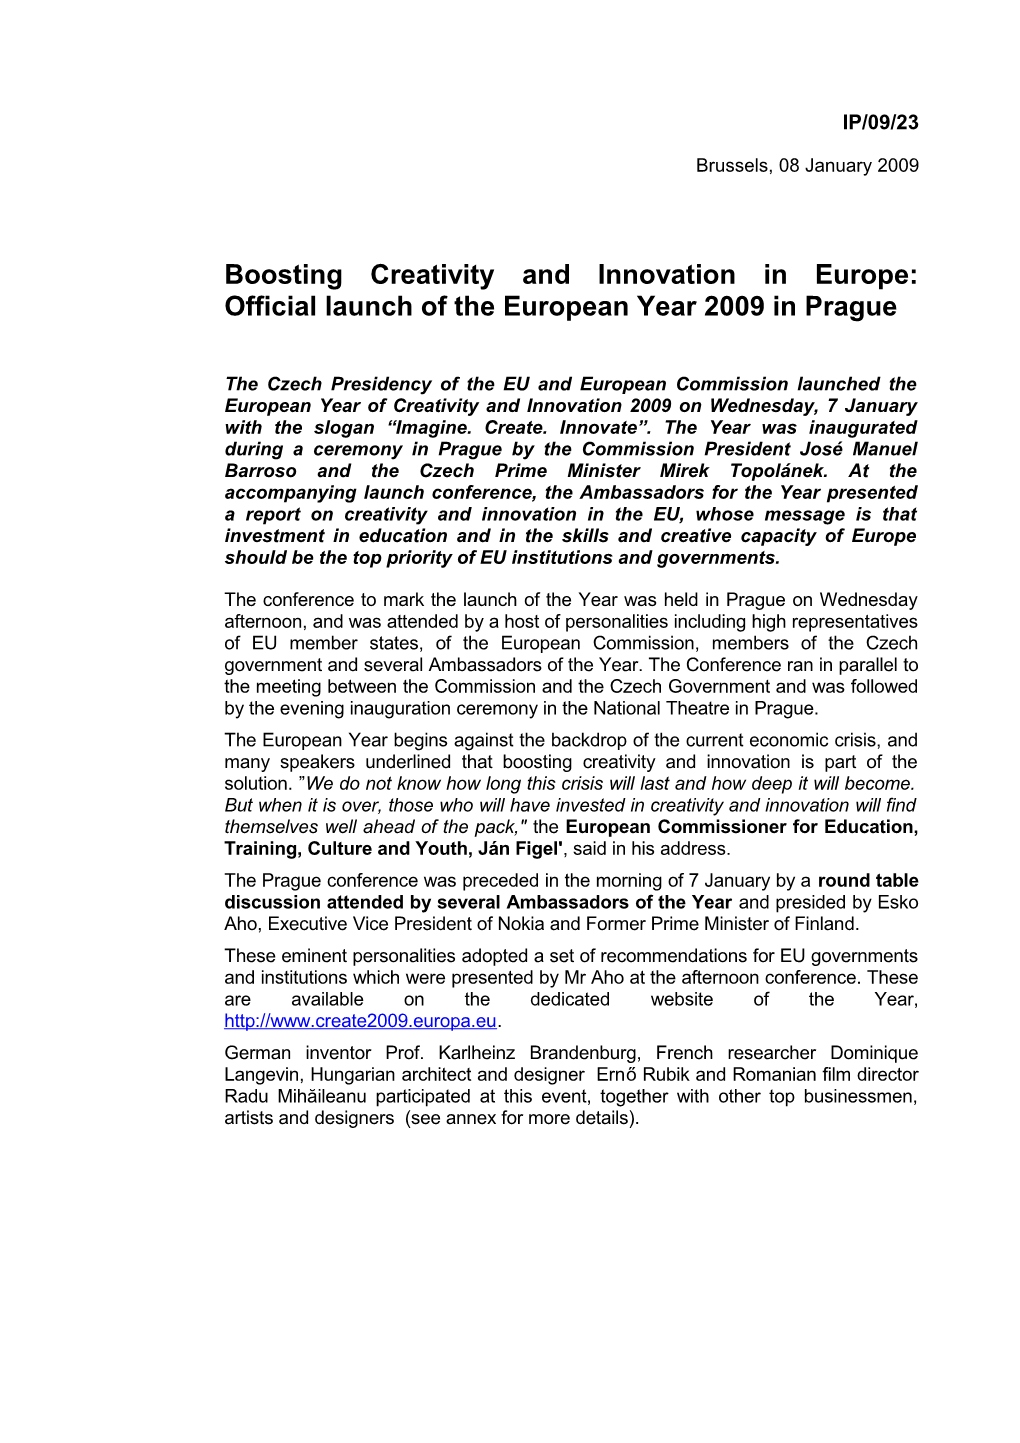 Boosting Creativity and Innovation in Europe: Official Launch of the European Year 2009